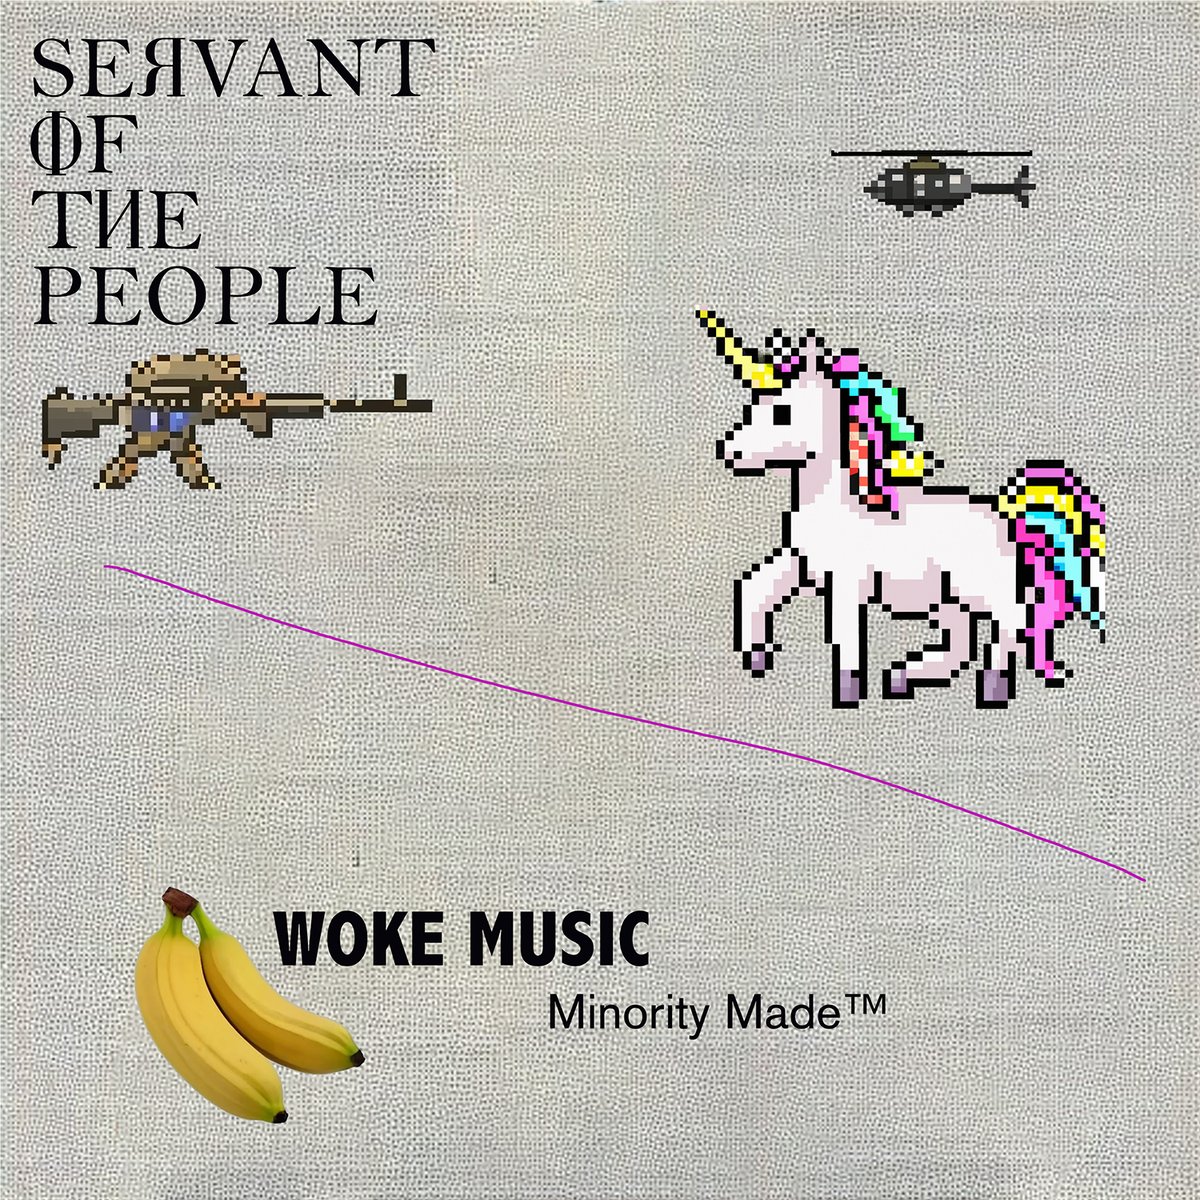 Out now on NN: Servant of the People [Woke Series] Through sonic intensity and a resolute rejection of sociability, this track, the inaugural piece in a series of four, strongly critiques the crudeness of contemporary retardedness. nn-audio.bandcamp.com/album/servant-…